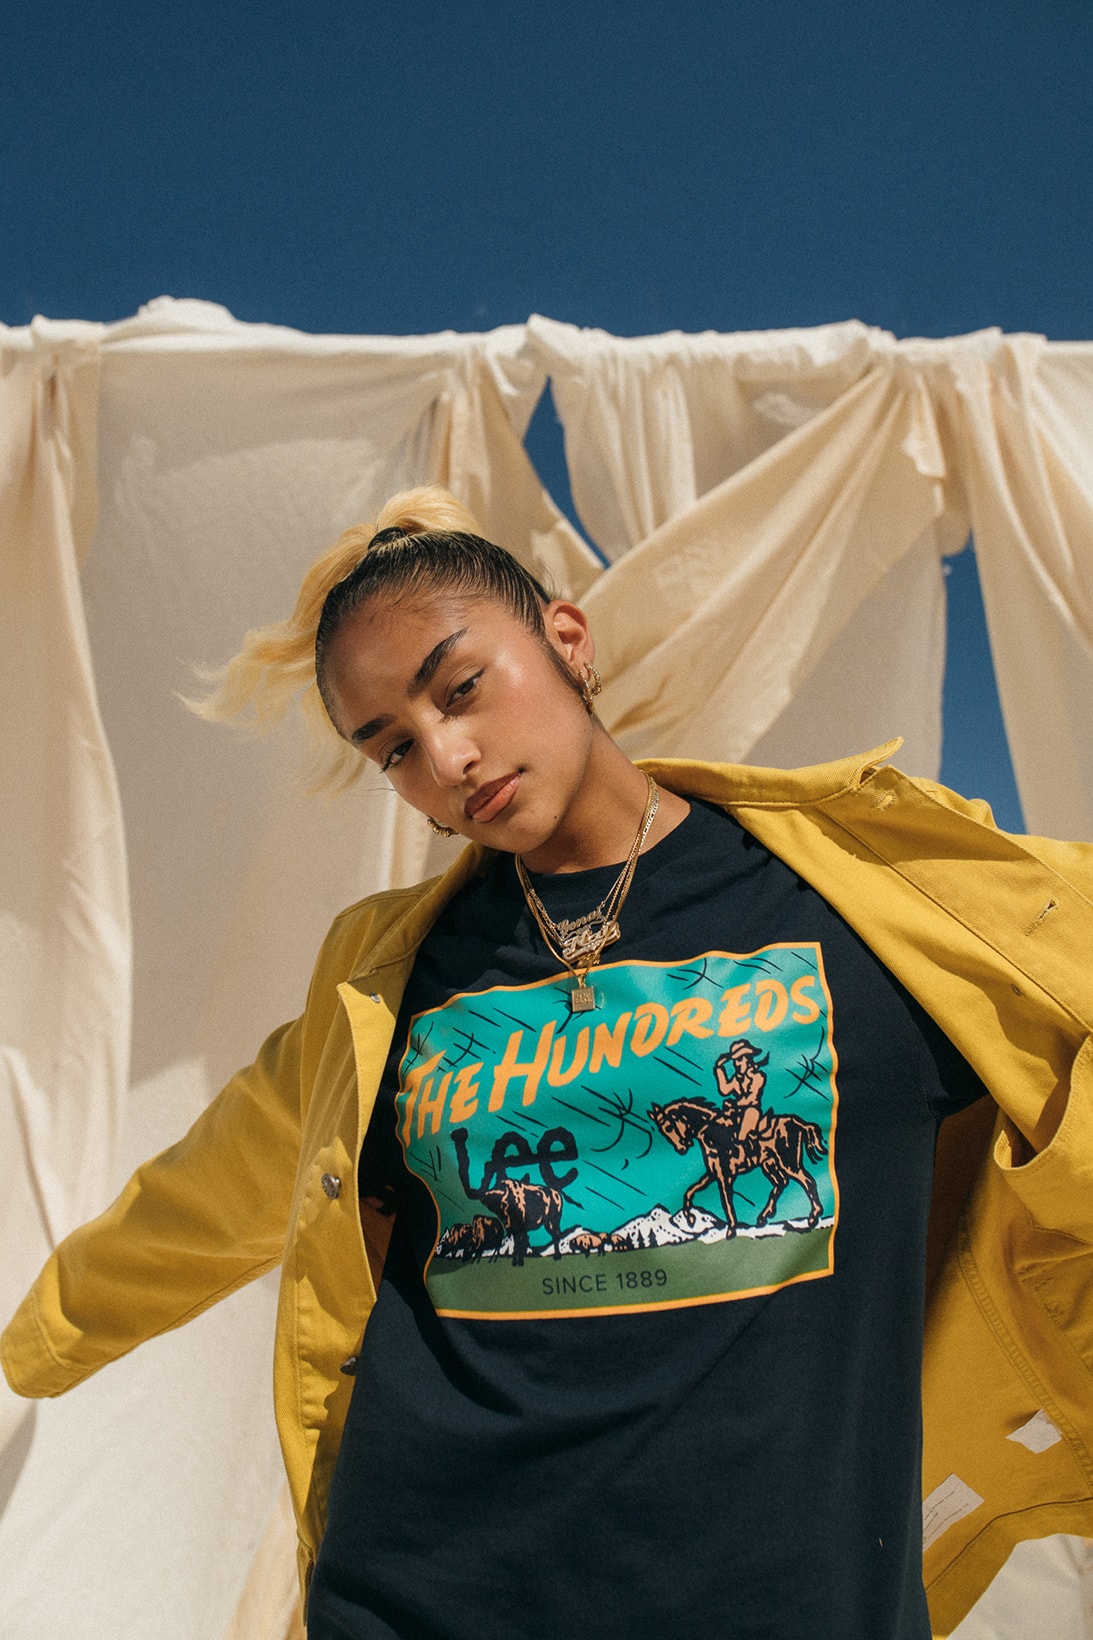 Lee Jeans and The Hundreds launch second capsule collection